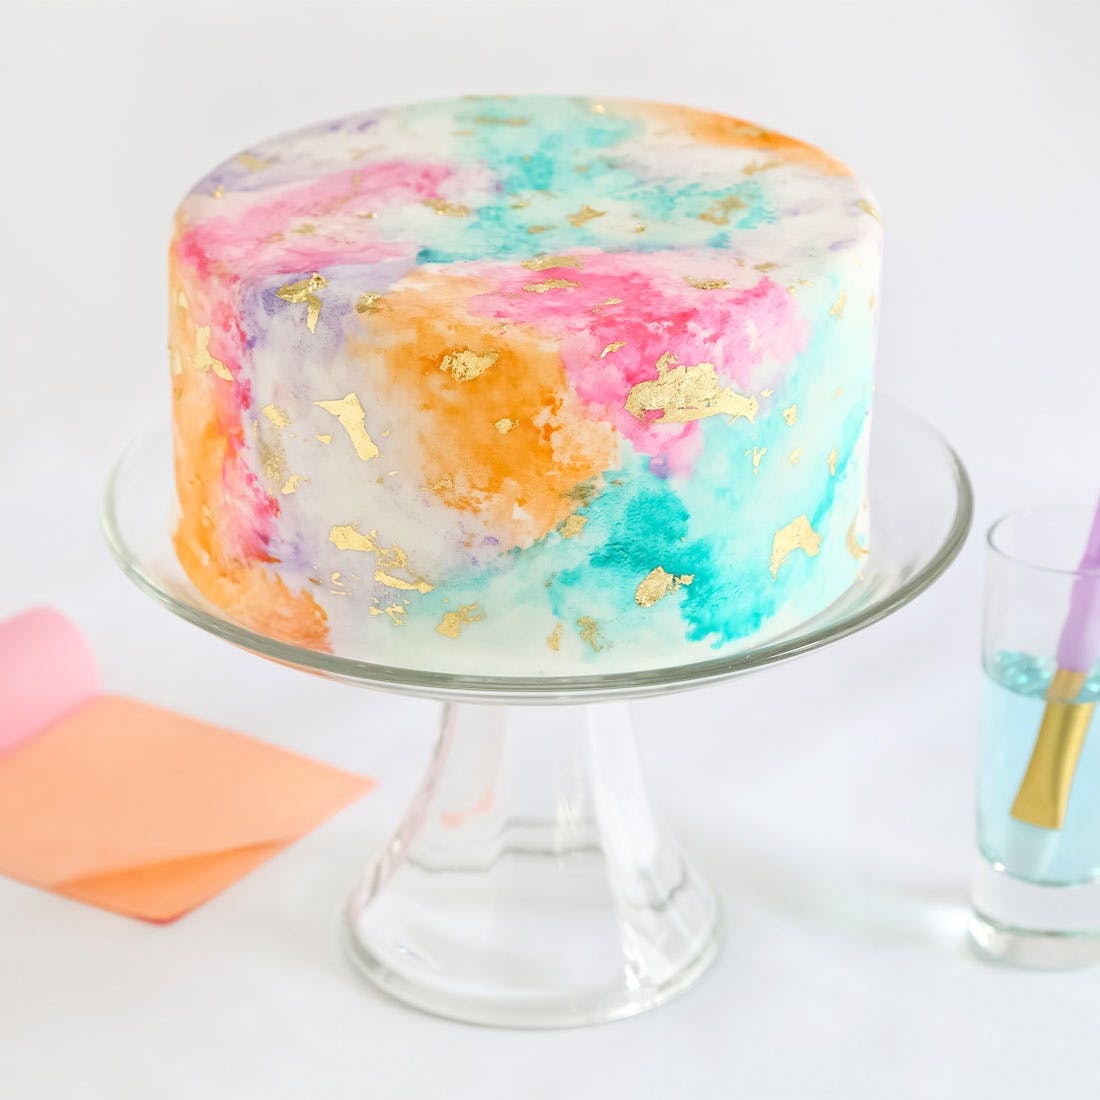 Top more than 84 watercolour paint cakes - awesomeenglish.edu.vn